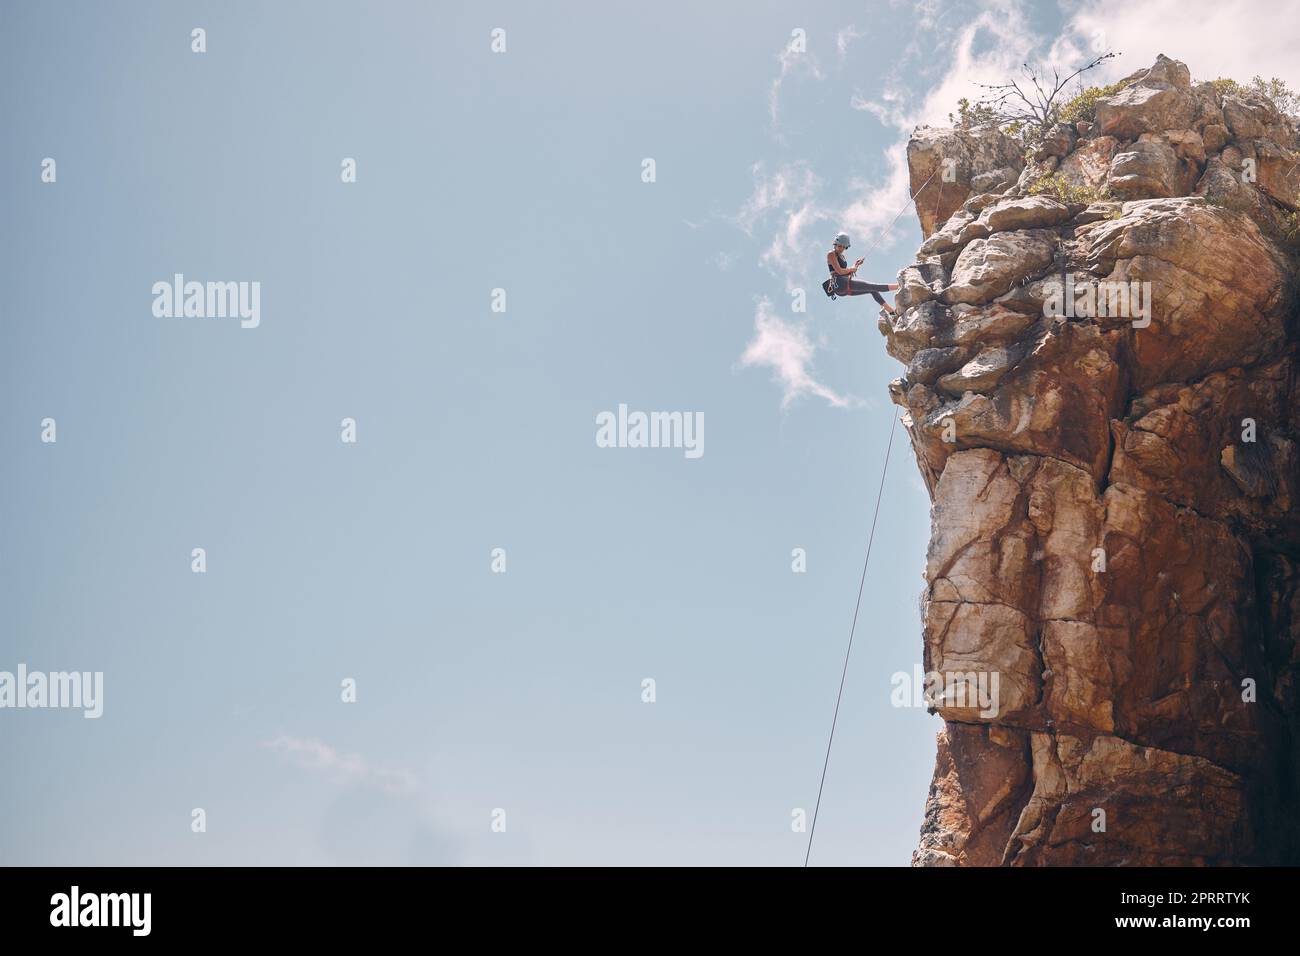 Mockup blue sky, mountain climbing woman and rock wall fearless hiking on abseiling training rope outdoor. Healthy fitness risk, adventure freedom challenge and strong surreal nature for sports cliff Stock Photo